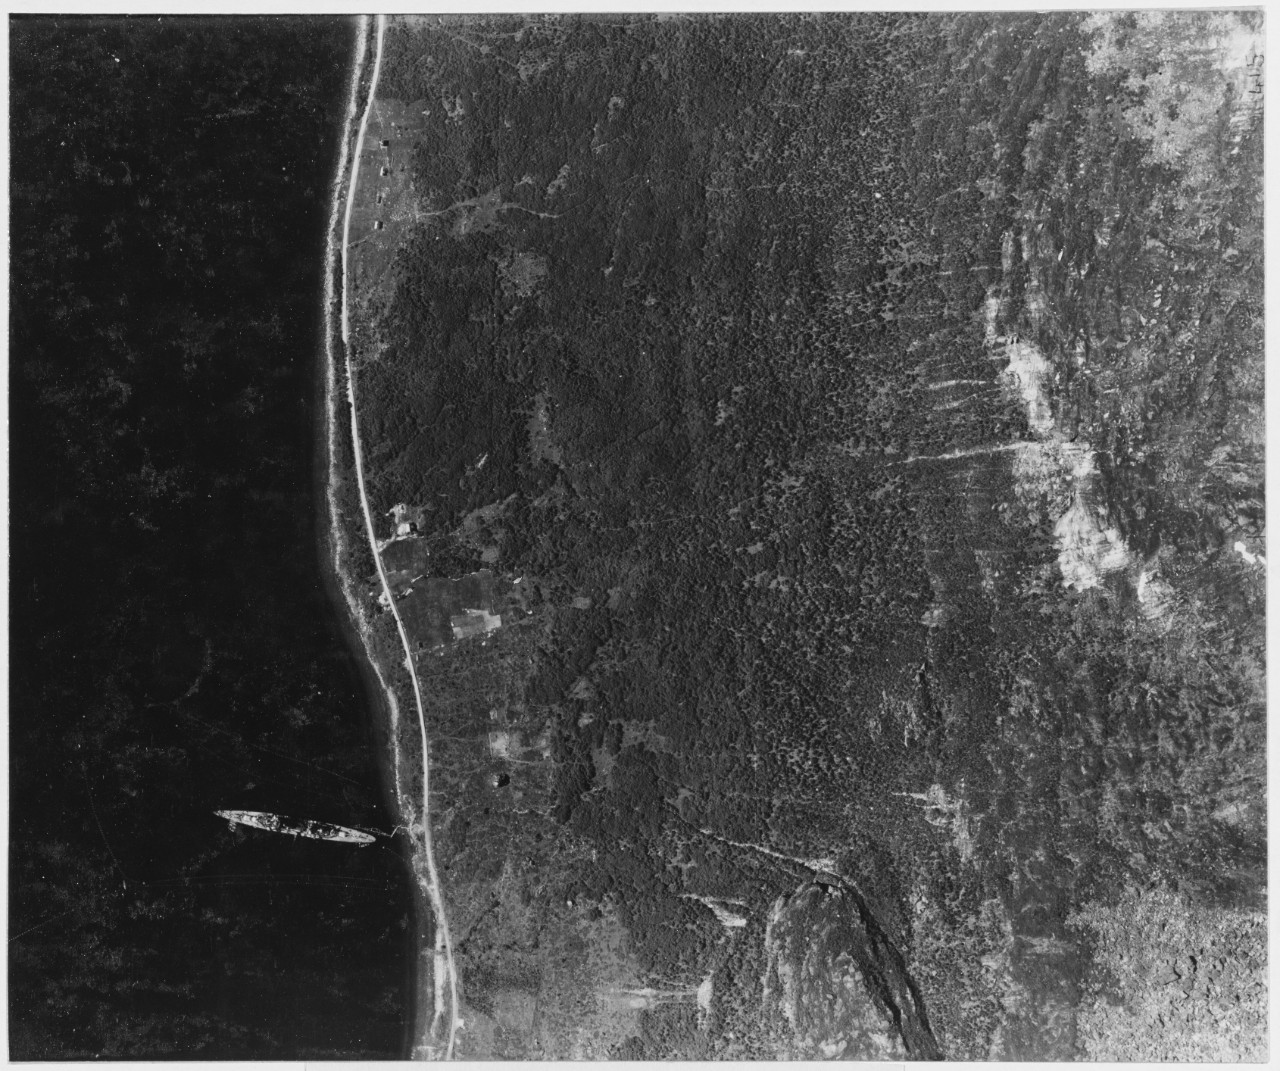 Aerial view looking down at German Ship ADMIRAL HIPPER, July 17, 1942